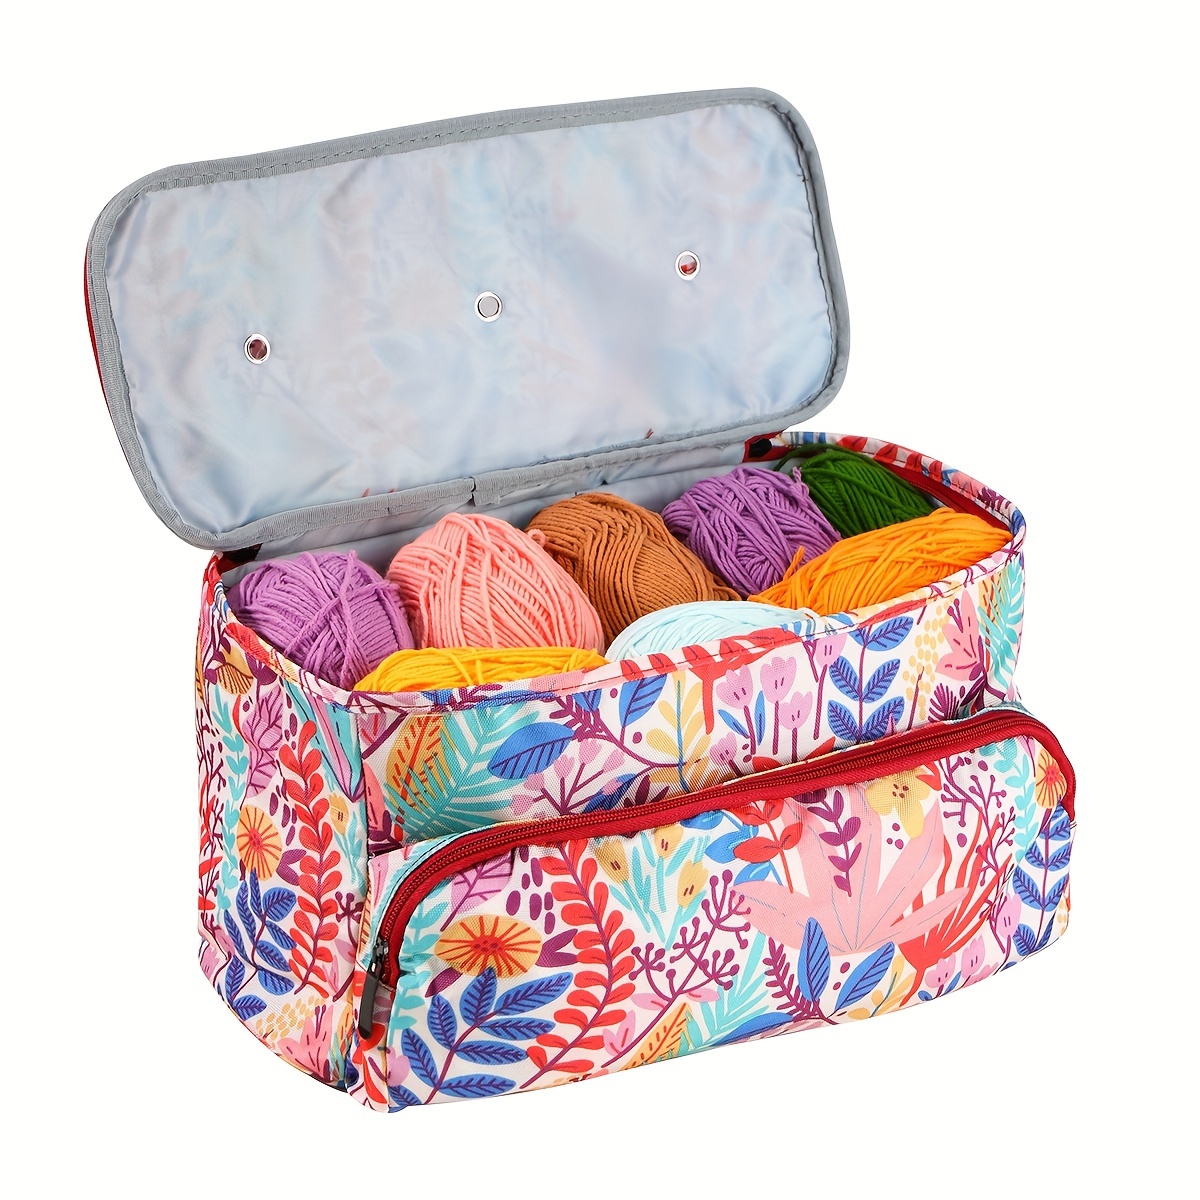 

stitch Savvy" Large Floral Knitting Tote Bag - Waterproof Yarn Storage Organizer With Crochet Hook & Needle Holder, Portable Sewing Accessory Case